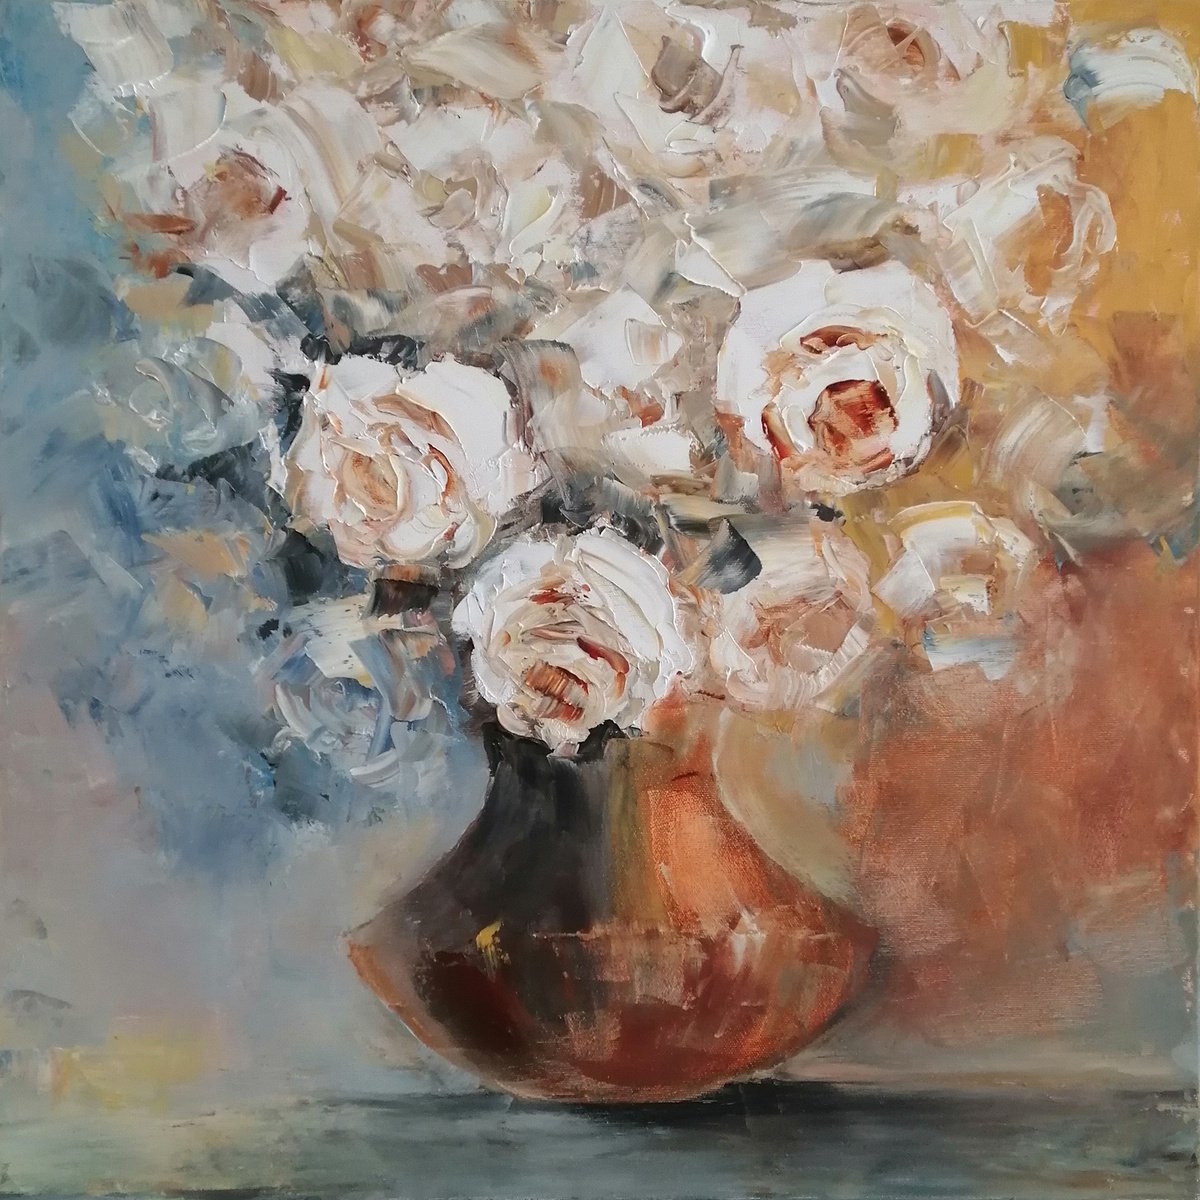 HONESTY, 60x60cm, blooming roses oil floral still life painting by Emilia Milcheva